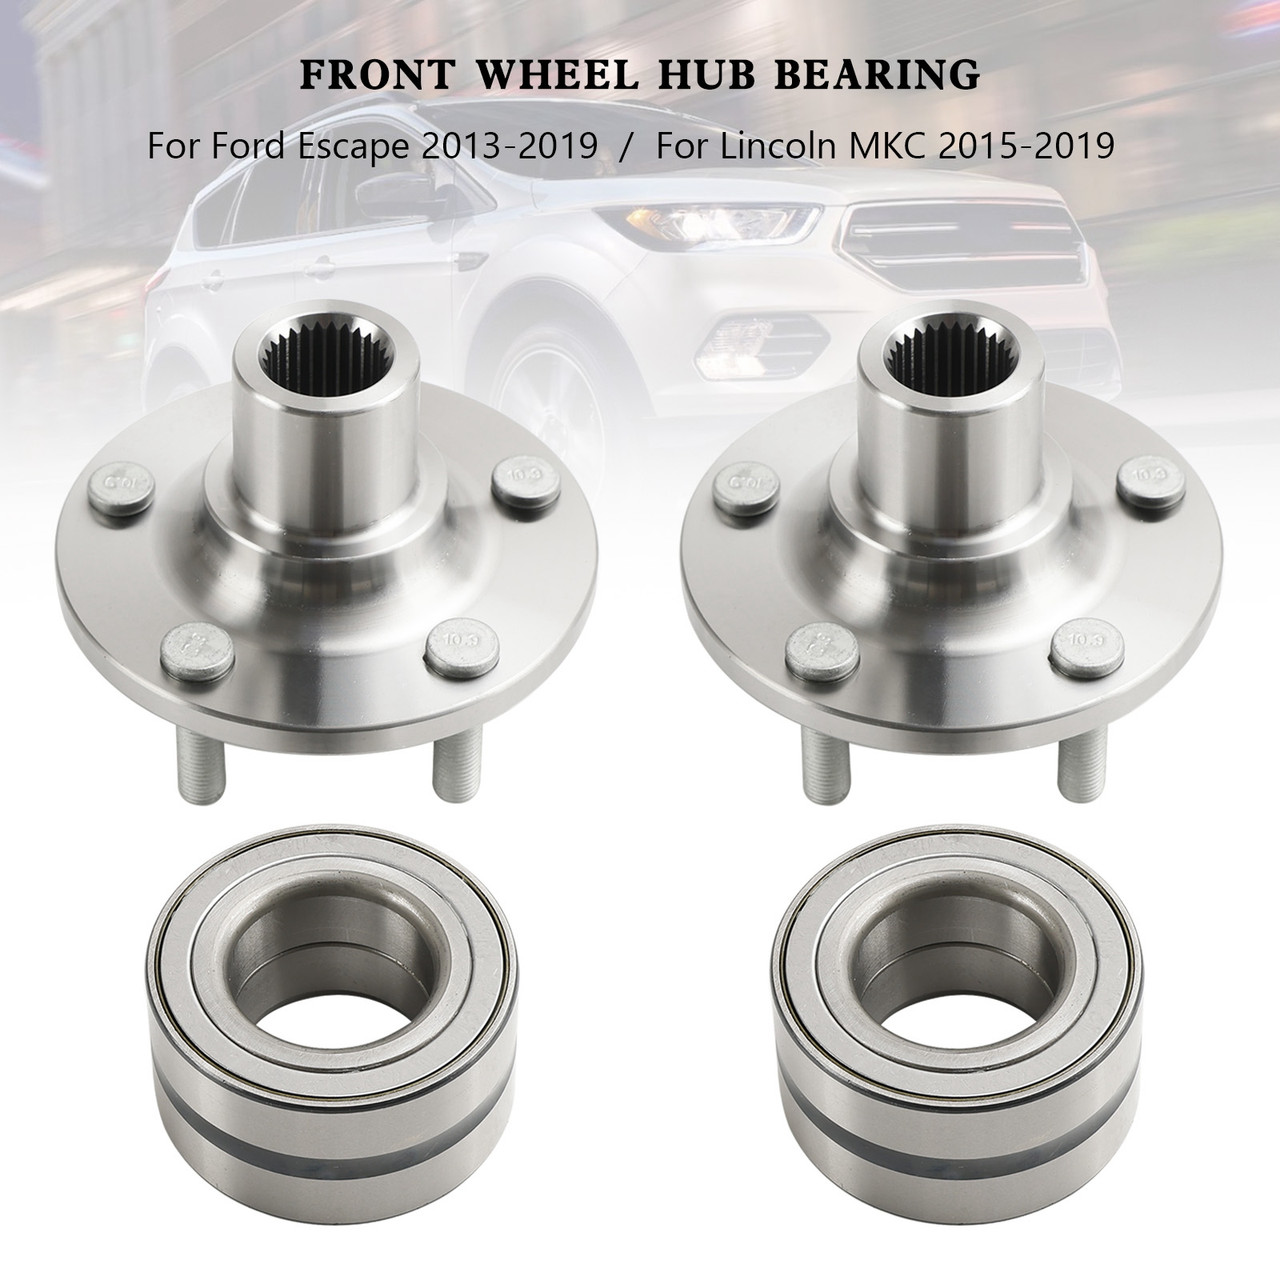 2x Front Wheel Hub Bearing Kits NT510110 For Ford Escape 2013-2019